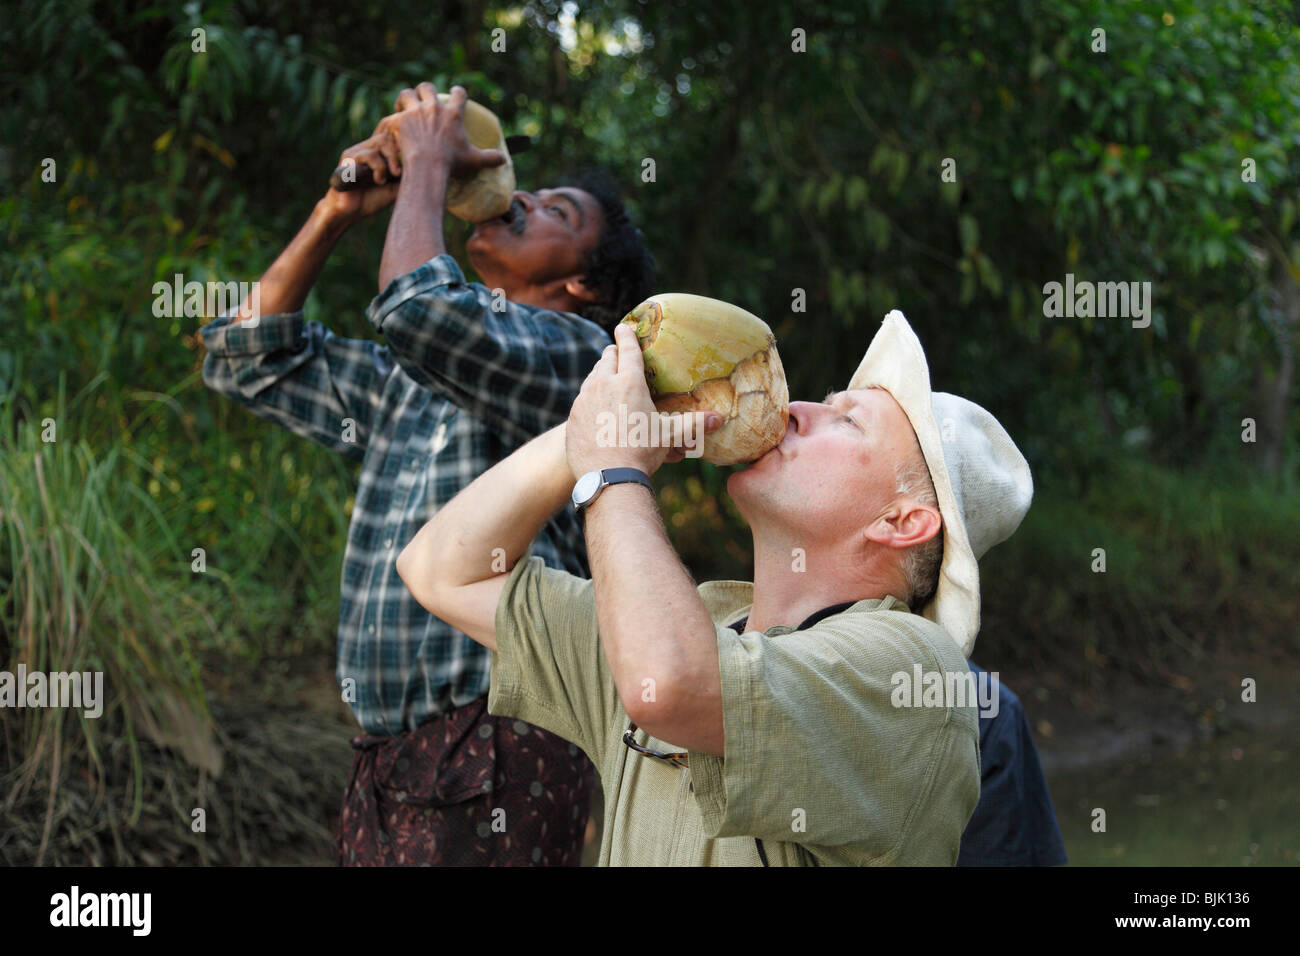 Tourist and an Indian man drinking from a coconut, Kerala, South India, India, Asia Stock Photo